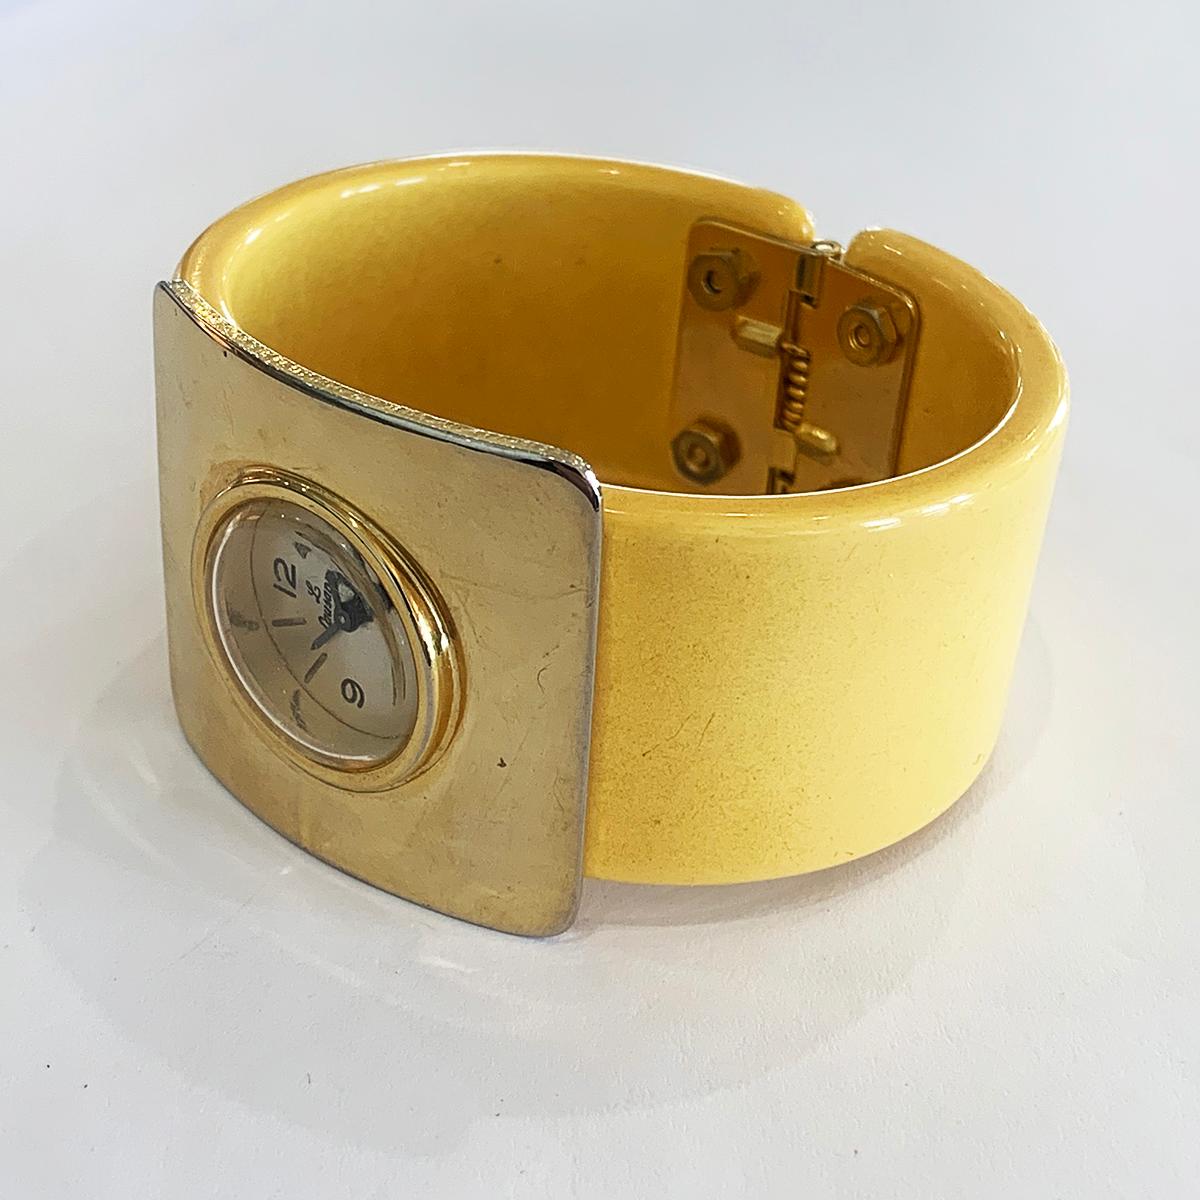 Mid Century  Corn Yellow Bakelite  mechanical movement Watch, clamper Bangle with Hidden joint below gilt front cover; 17 Jewel, by Swiss maker Lausanne. Shock proof workings, keeps good time for age. A fantastic period piece to suite the most